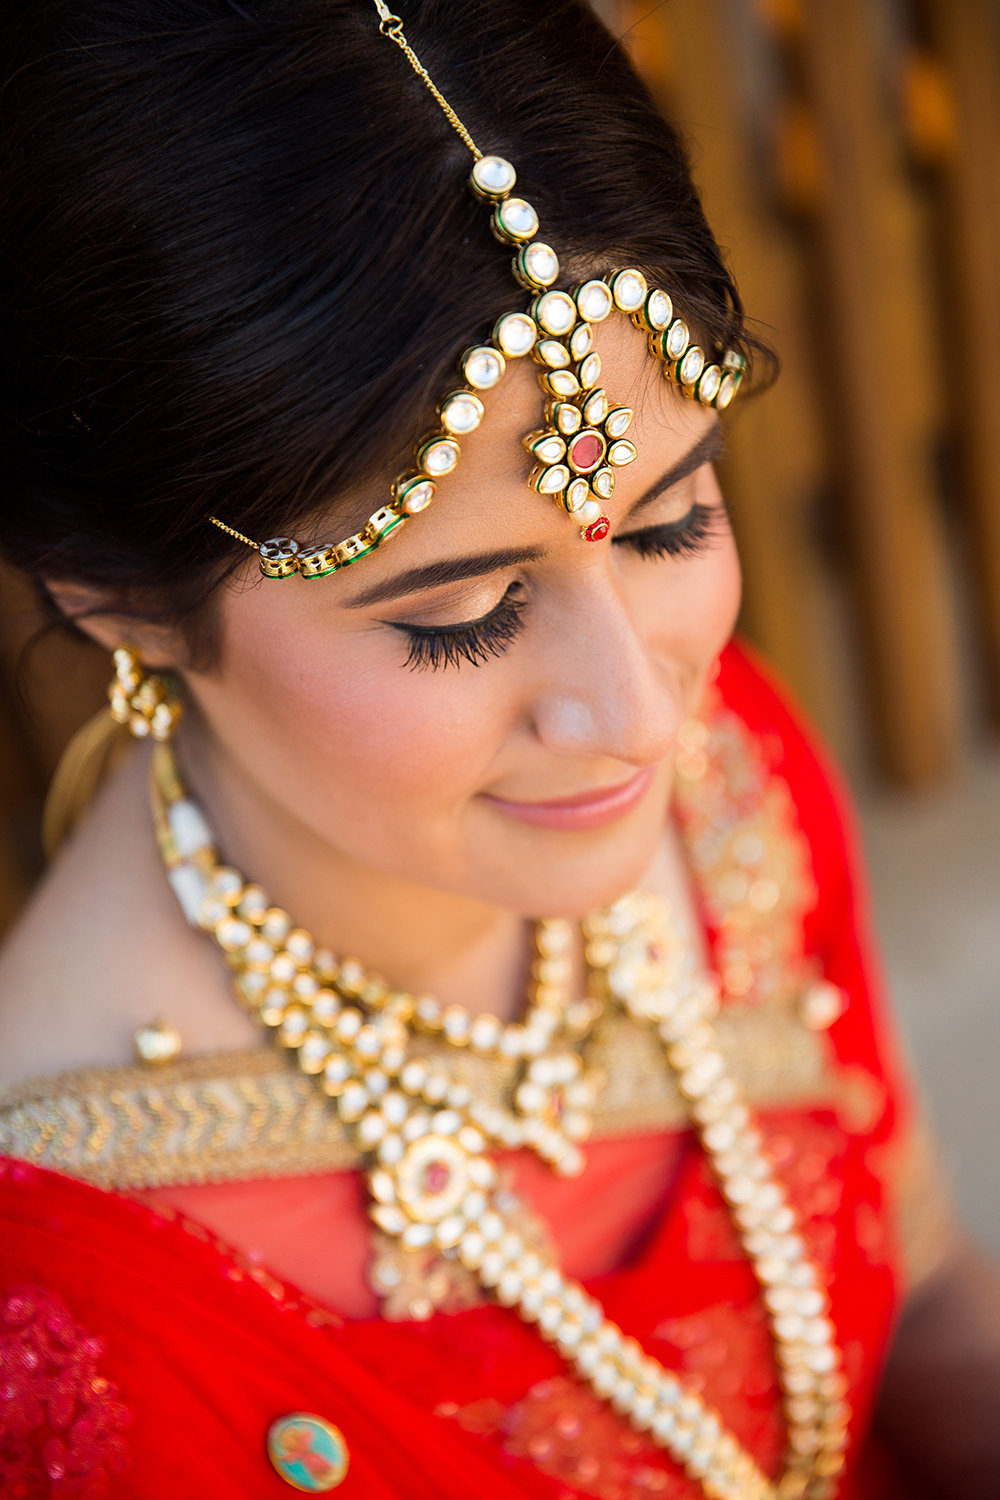 Lovely Indian Bride with Jewelry and Red Sari